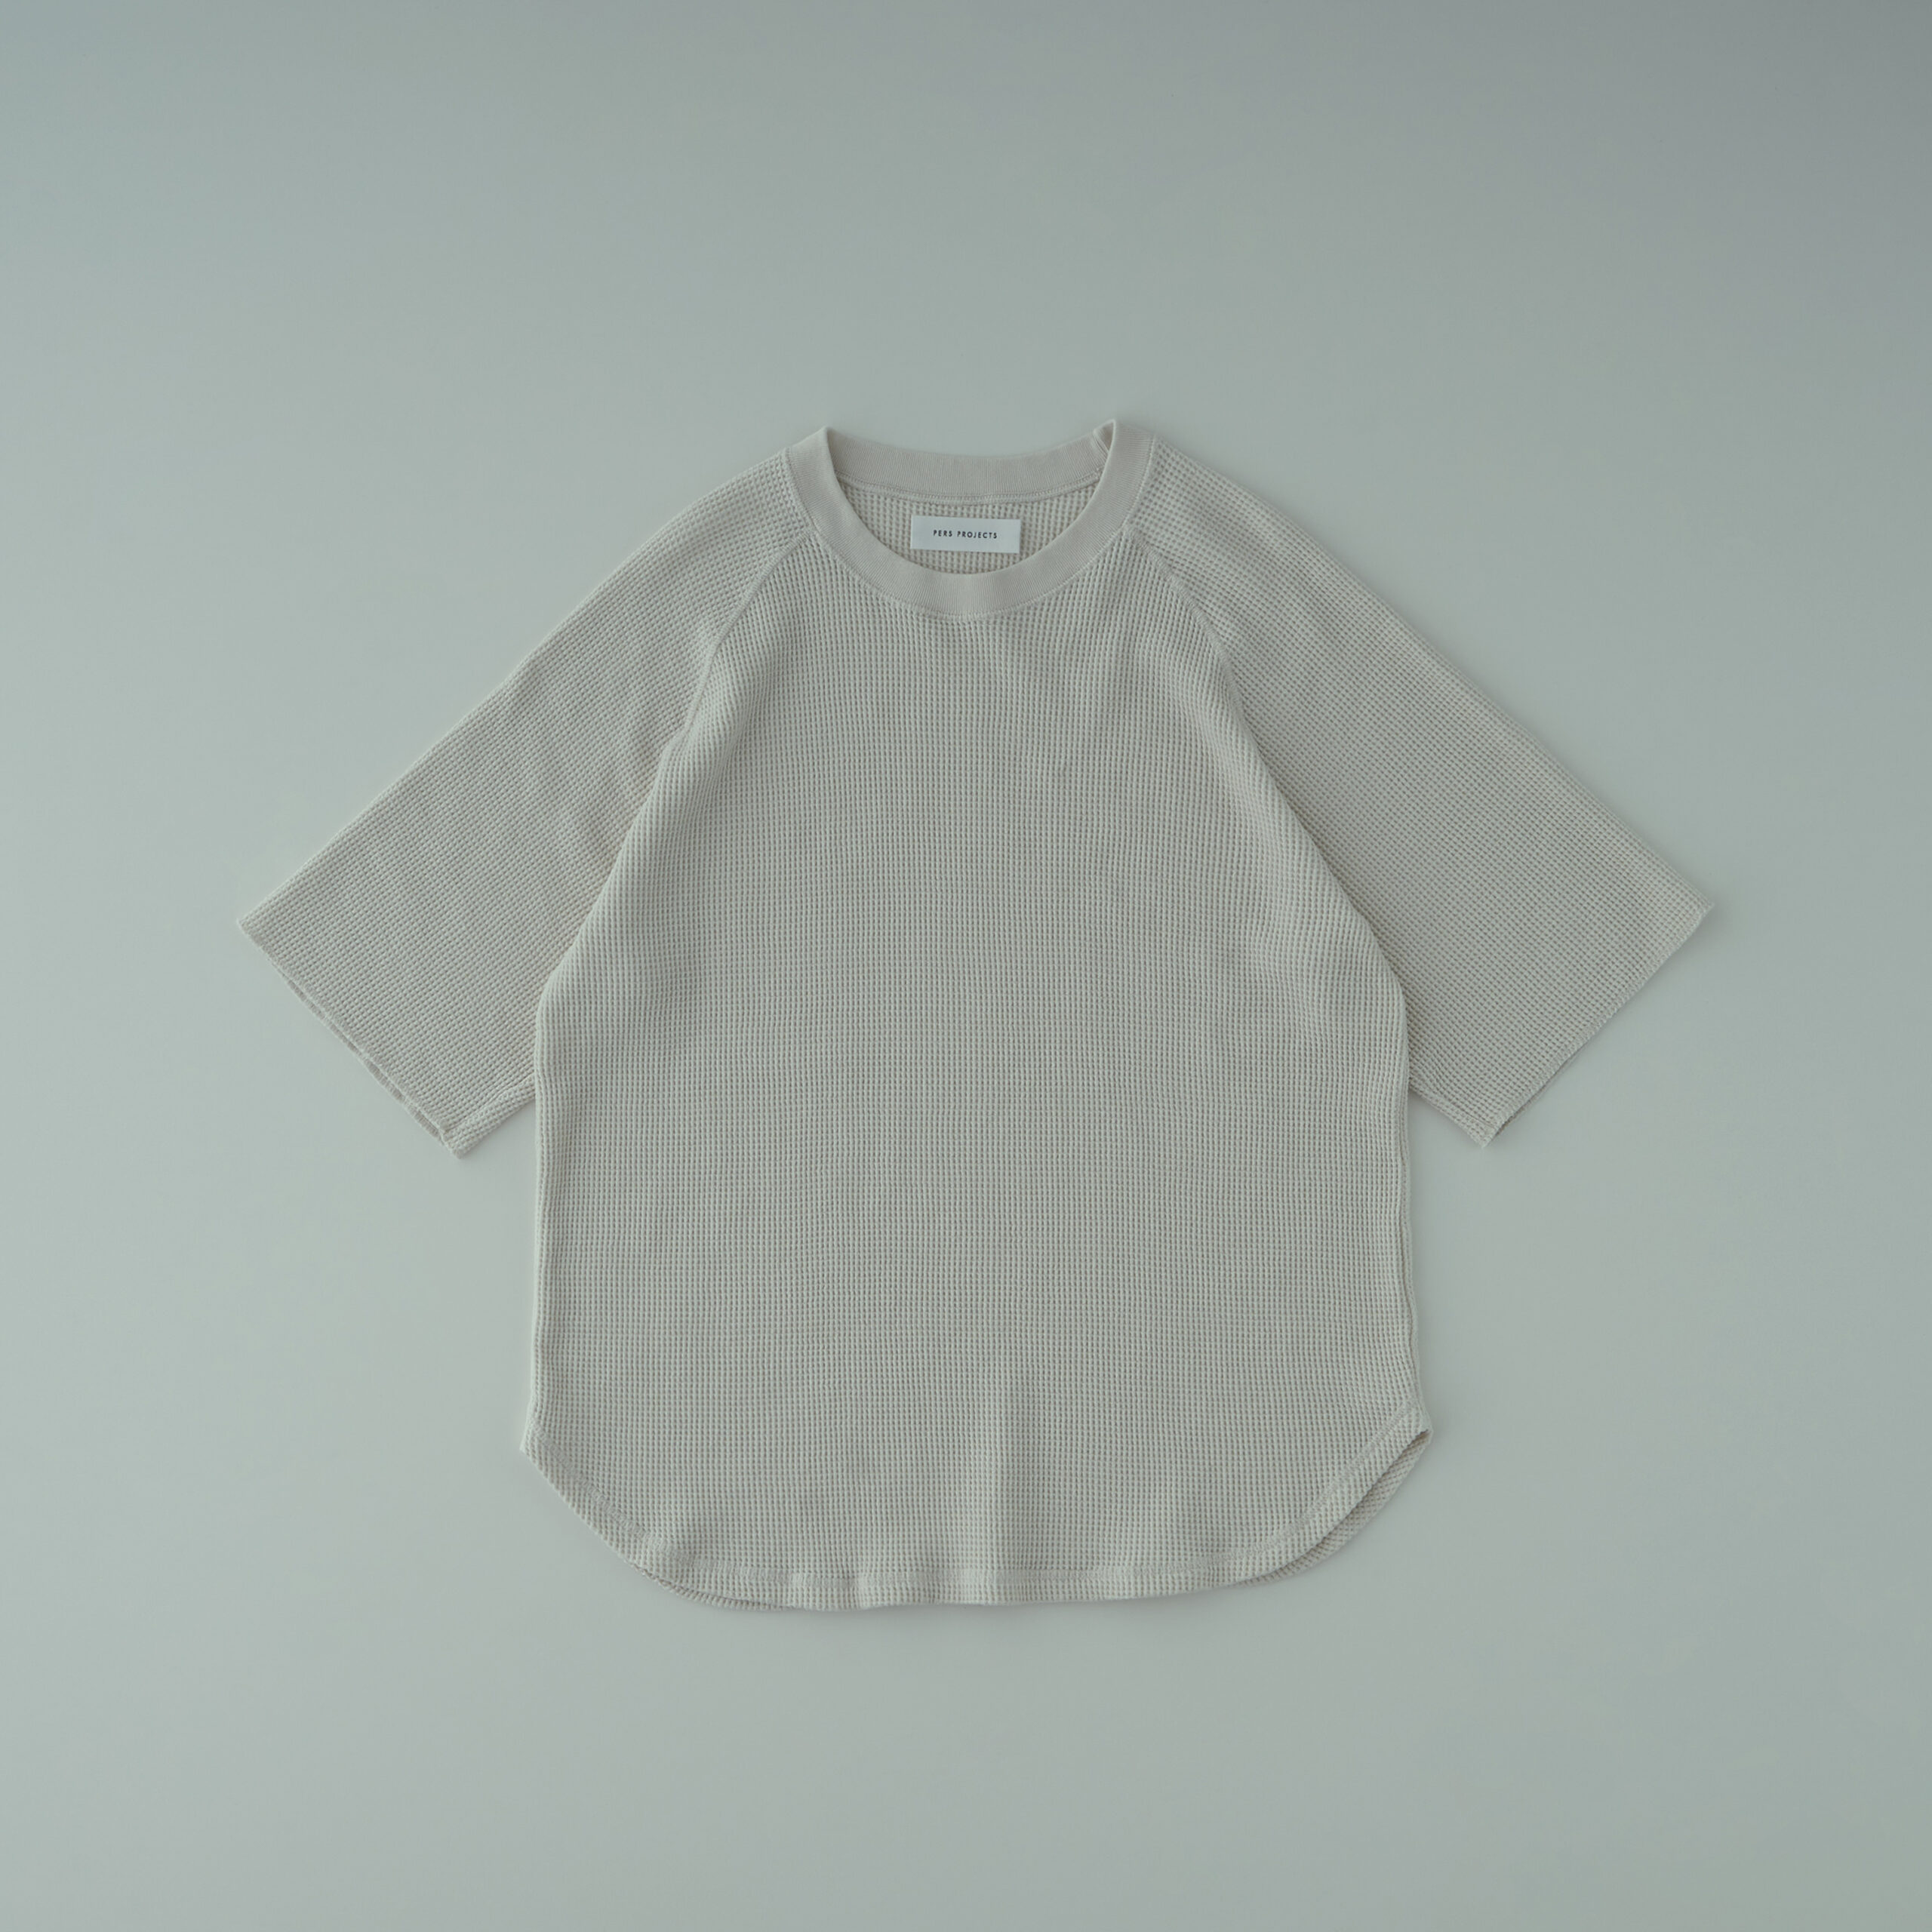 HANSSON H/S TEE”SOLID”